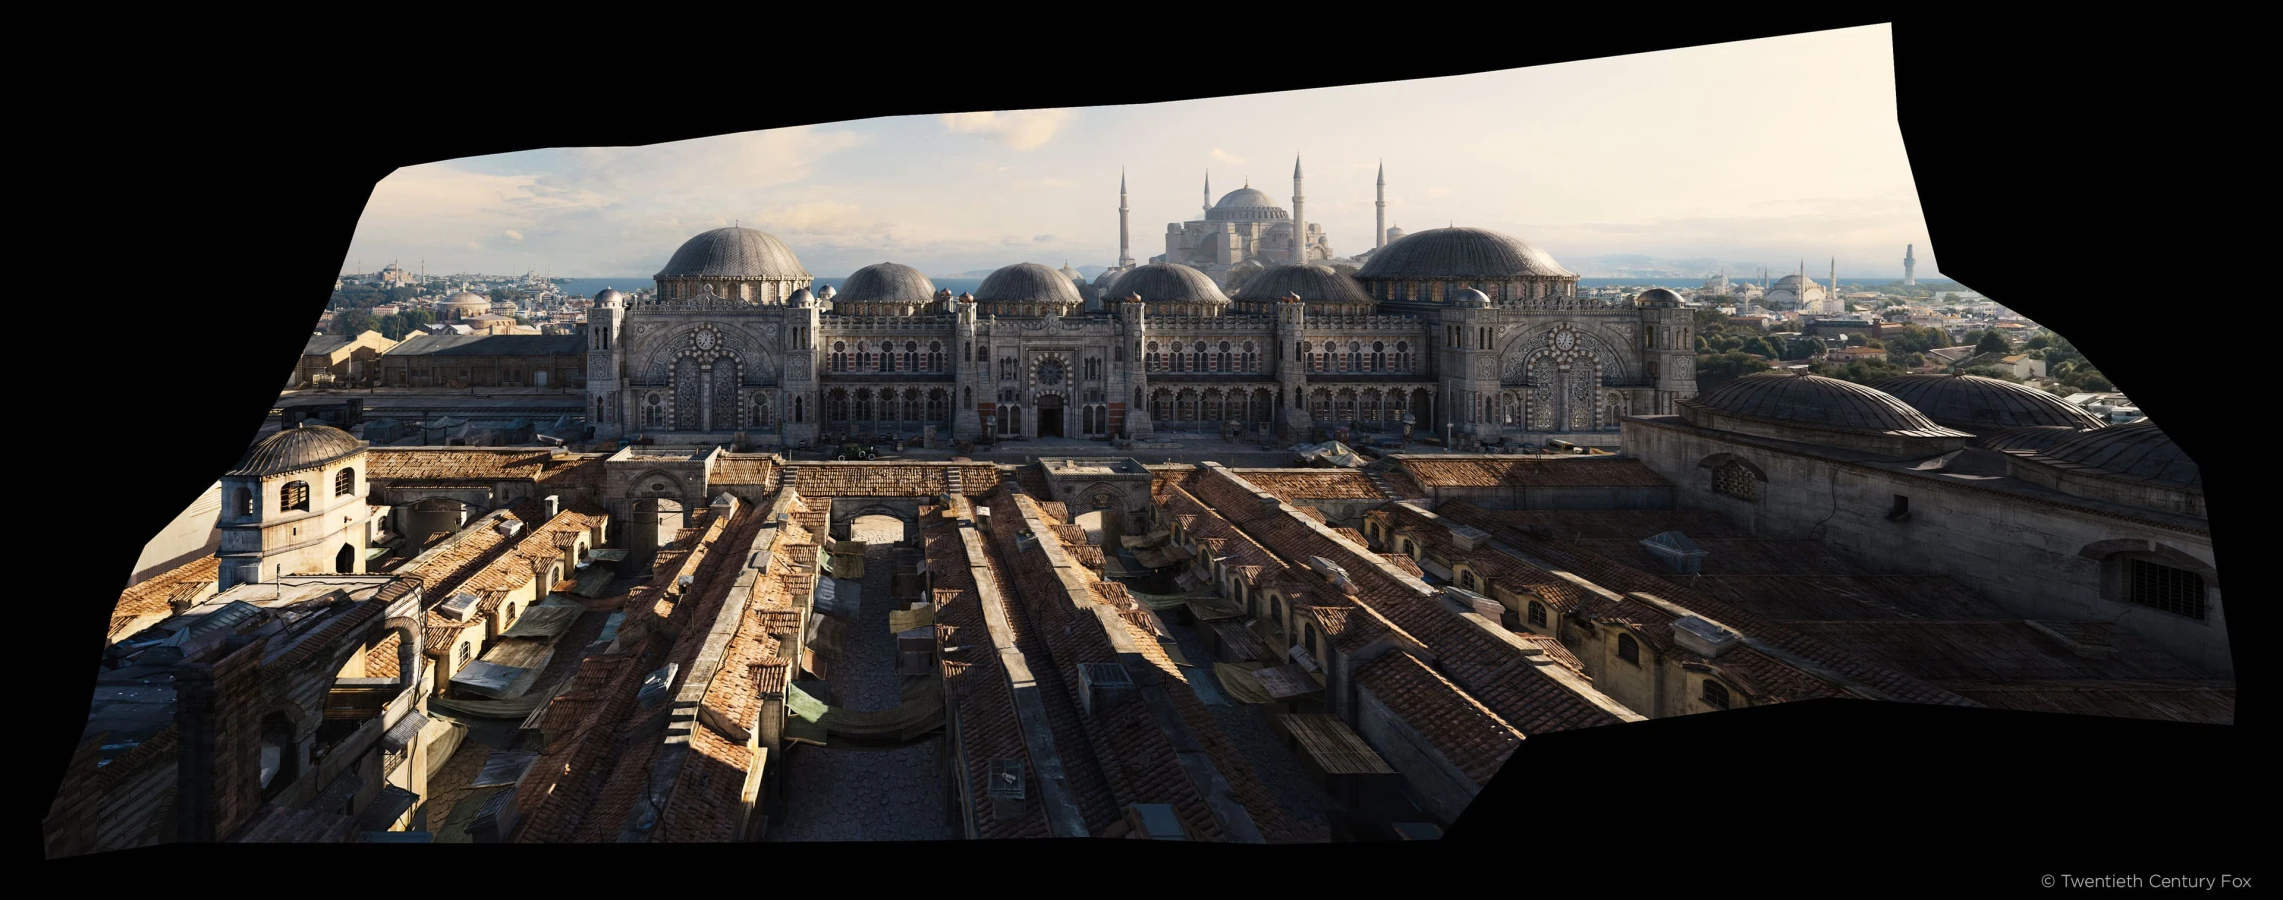  Murder on the Orient Express Istanbul palace shot Raynault vfx 